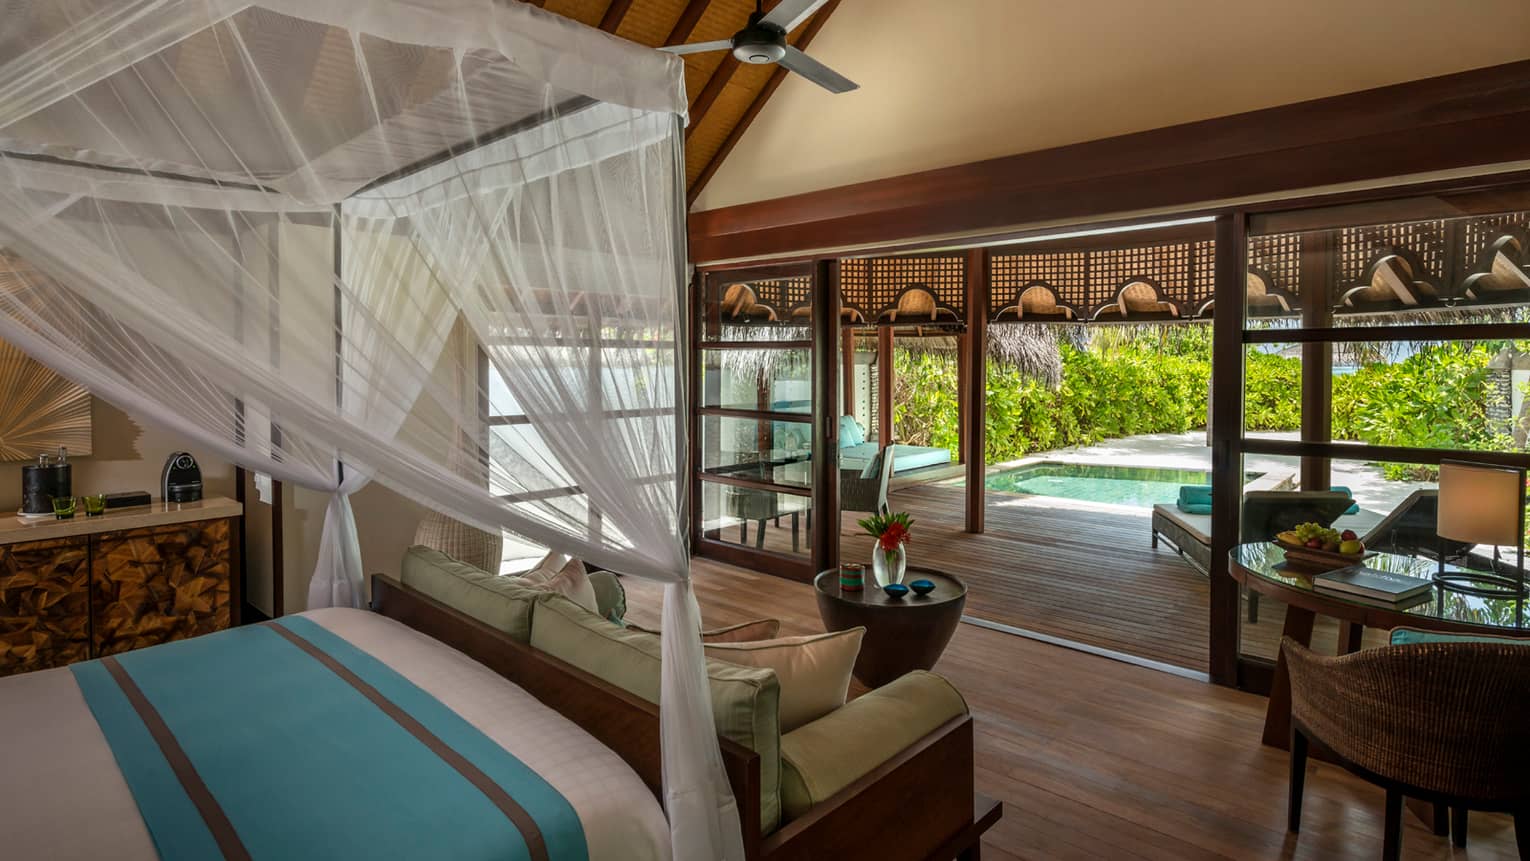 Beach bungalow canopy bed and sofa in front of open-air wall leading to deck and private plunge pool